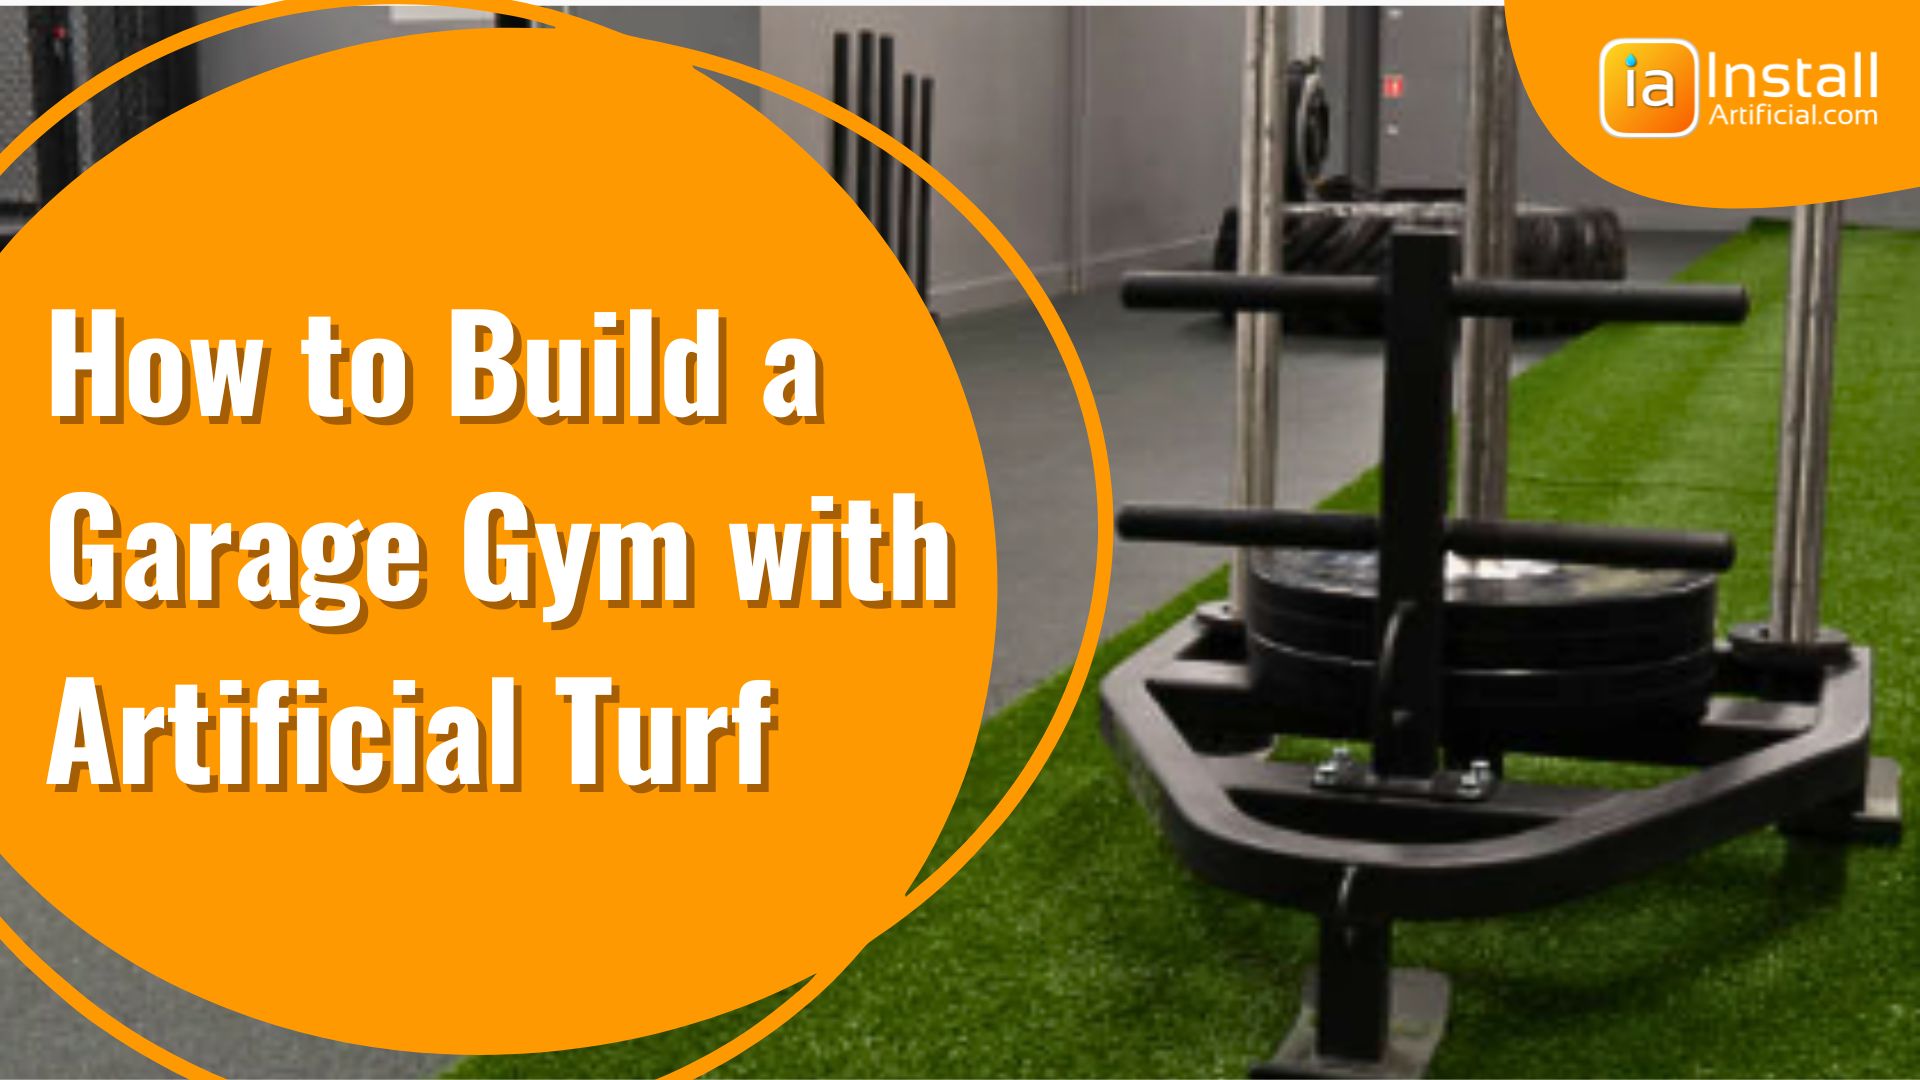 How to Build a Garage Gym with Artificial Turf